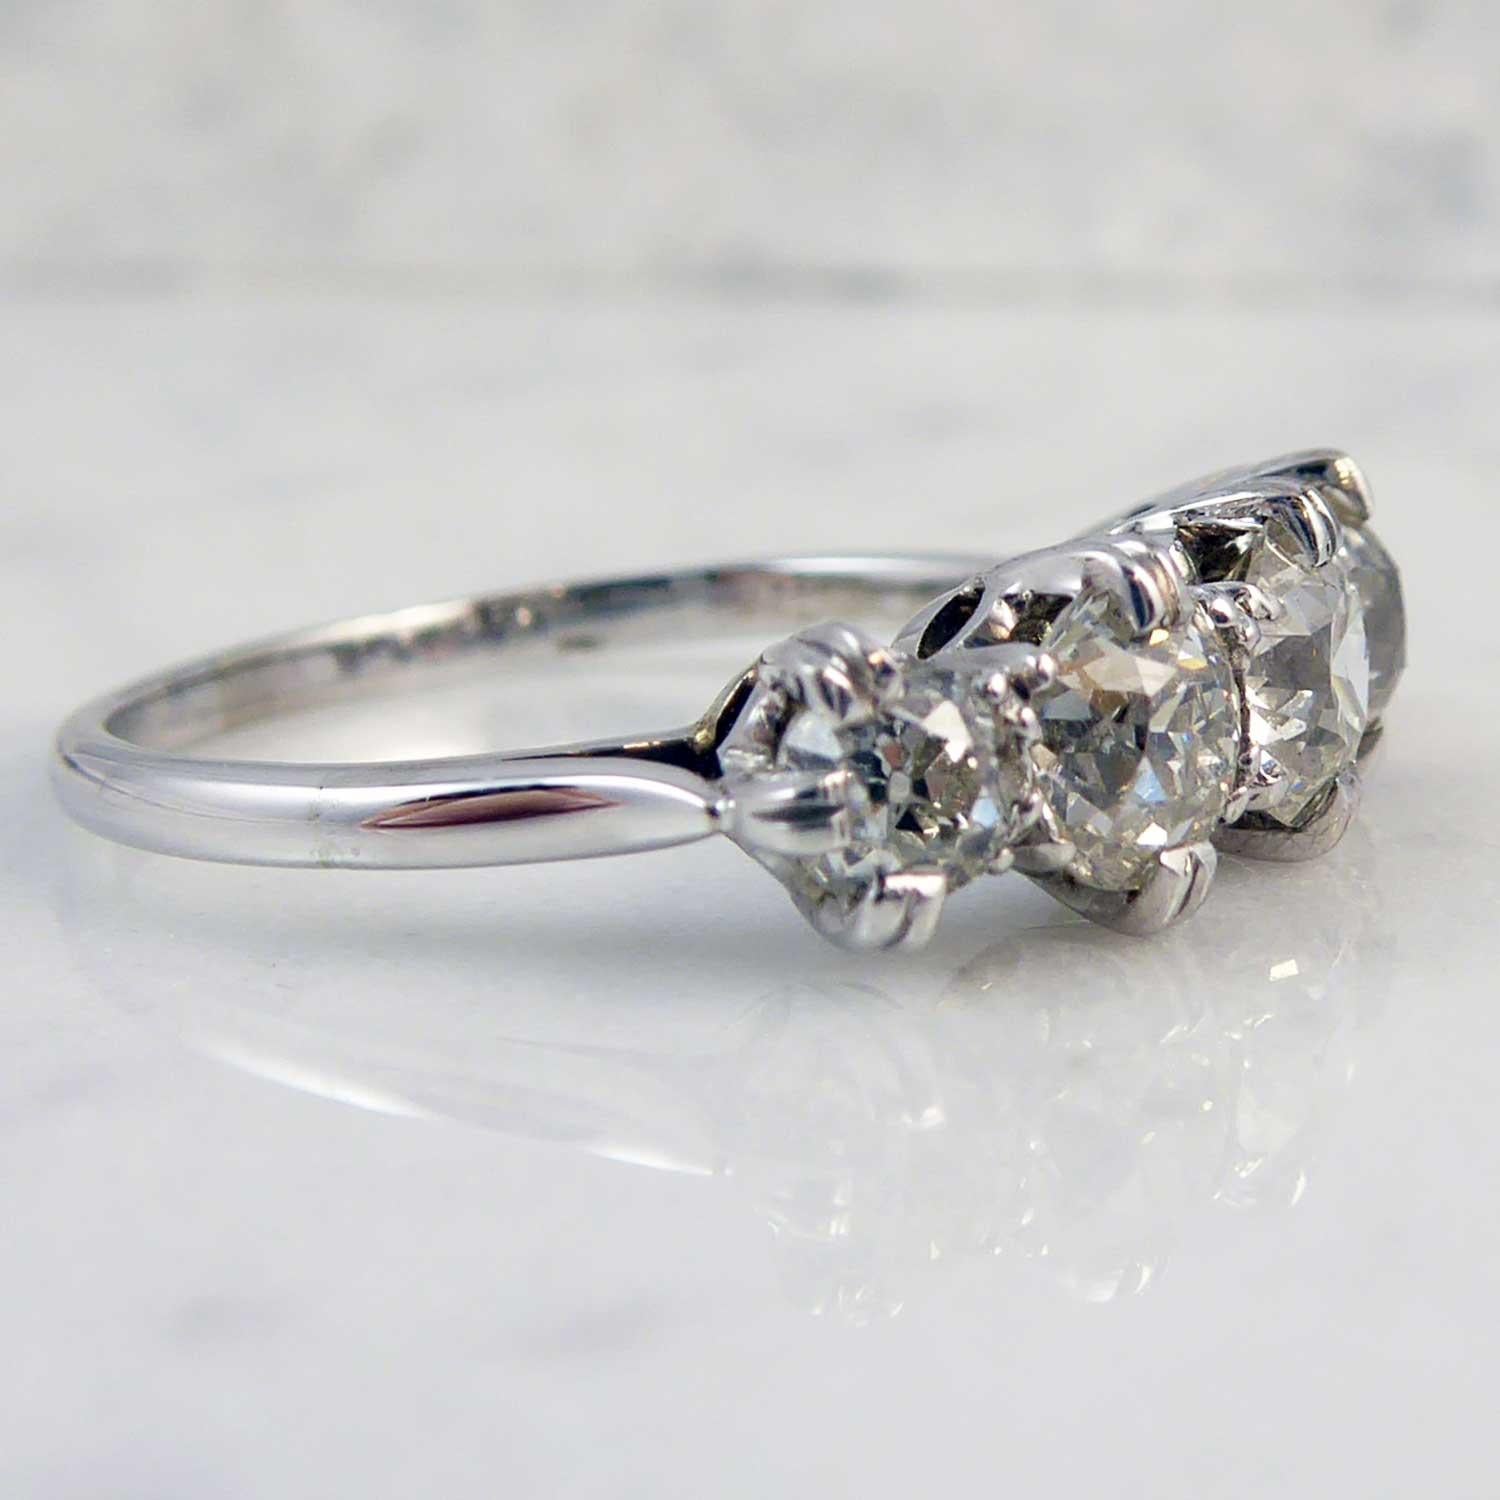 A vintage diamond ring set with a total of five old European cut diamonds in a row across the finger.  The diamonds are all claw set in white metal and graduate in size from the centre diamond at 4.85mm  x 4.78mm down to 3.67mm x 3.47mm.  White